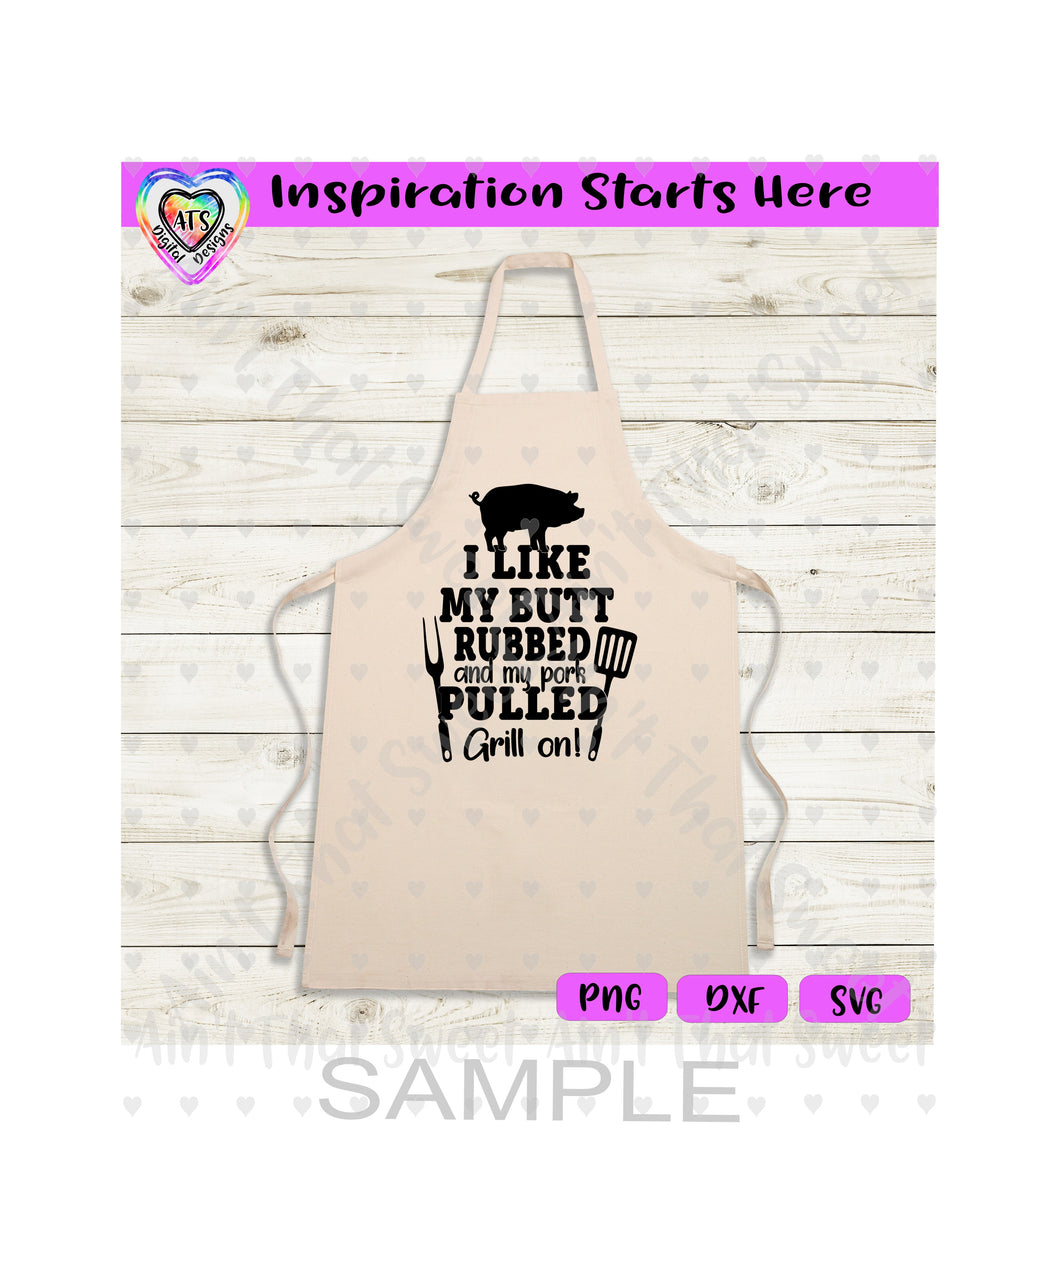 I Like My Butt Rubbed and My Pork Pulled | Grill On - Transparent PNG SVG DXF - Silhouette, Cricut, ScanNCut